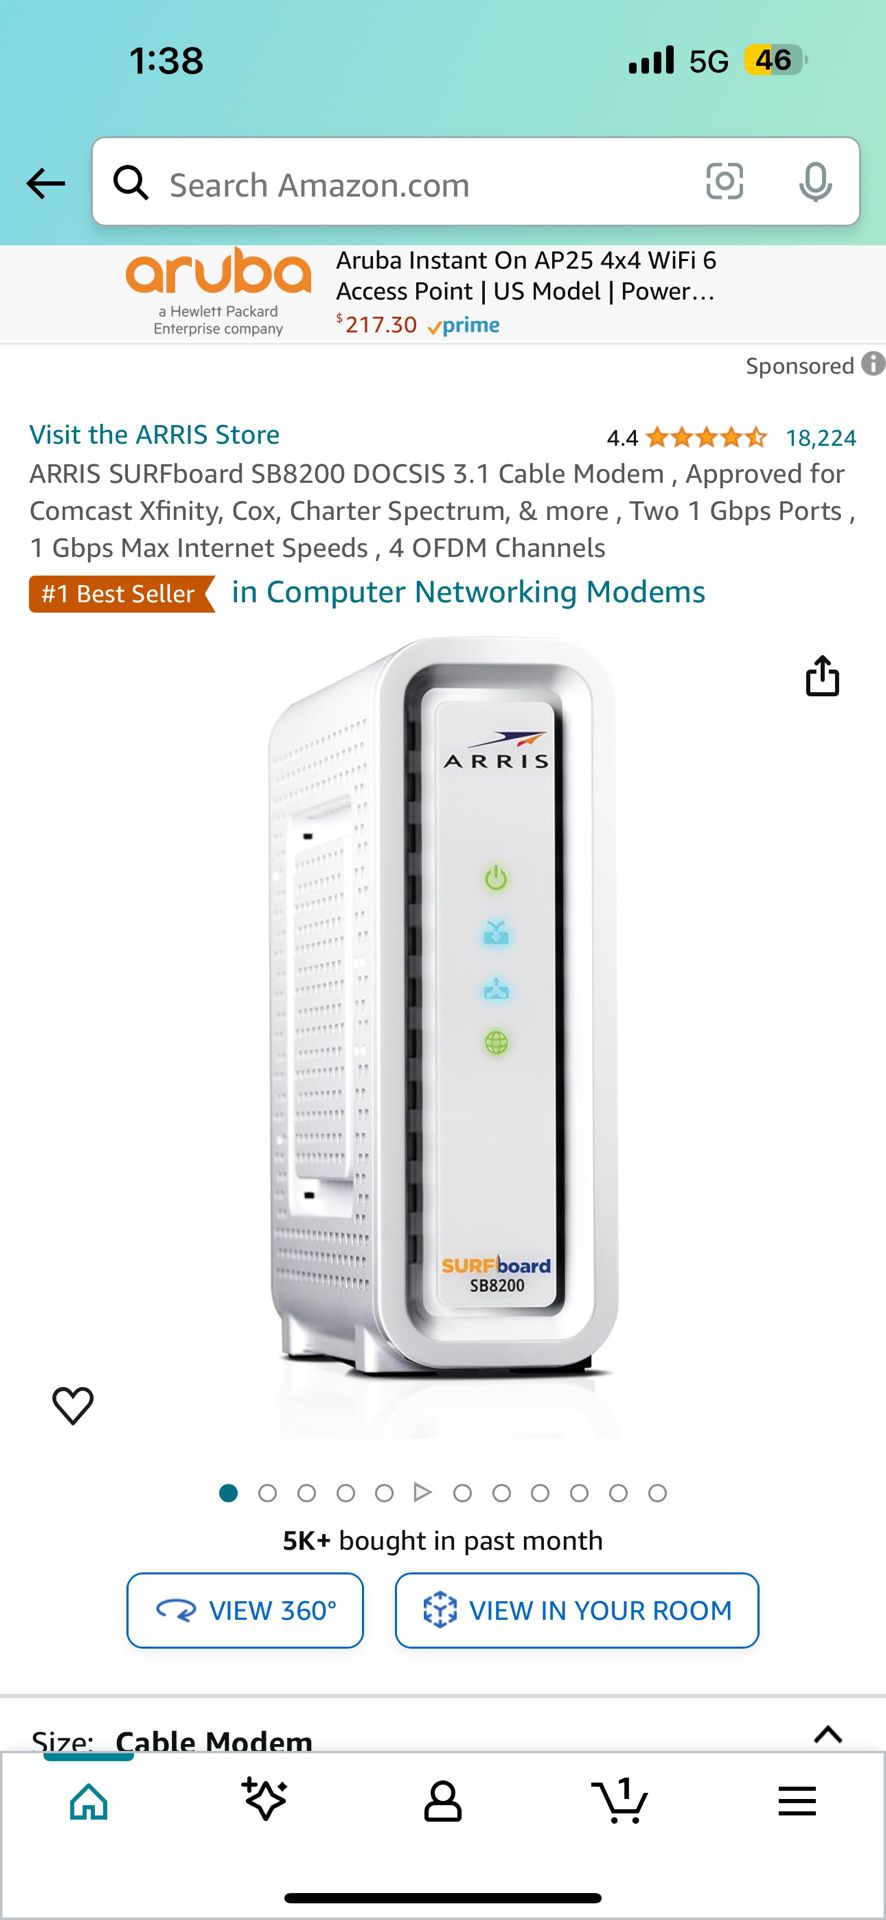 ARRIS SURFboard SB8200 DOCSIS 3.1 Cable Modem (Like New)